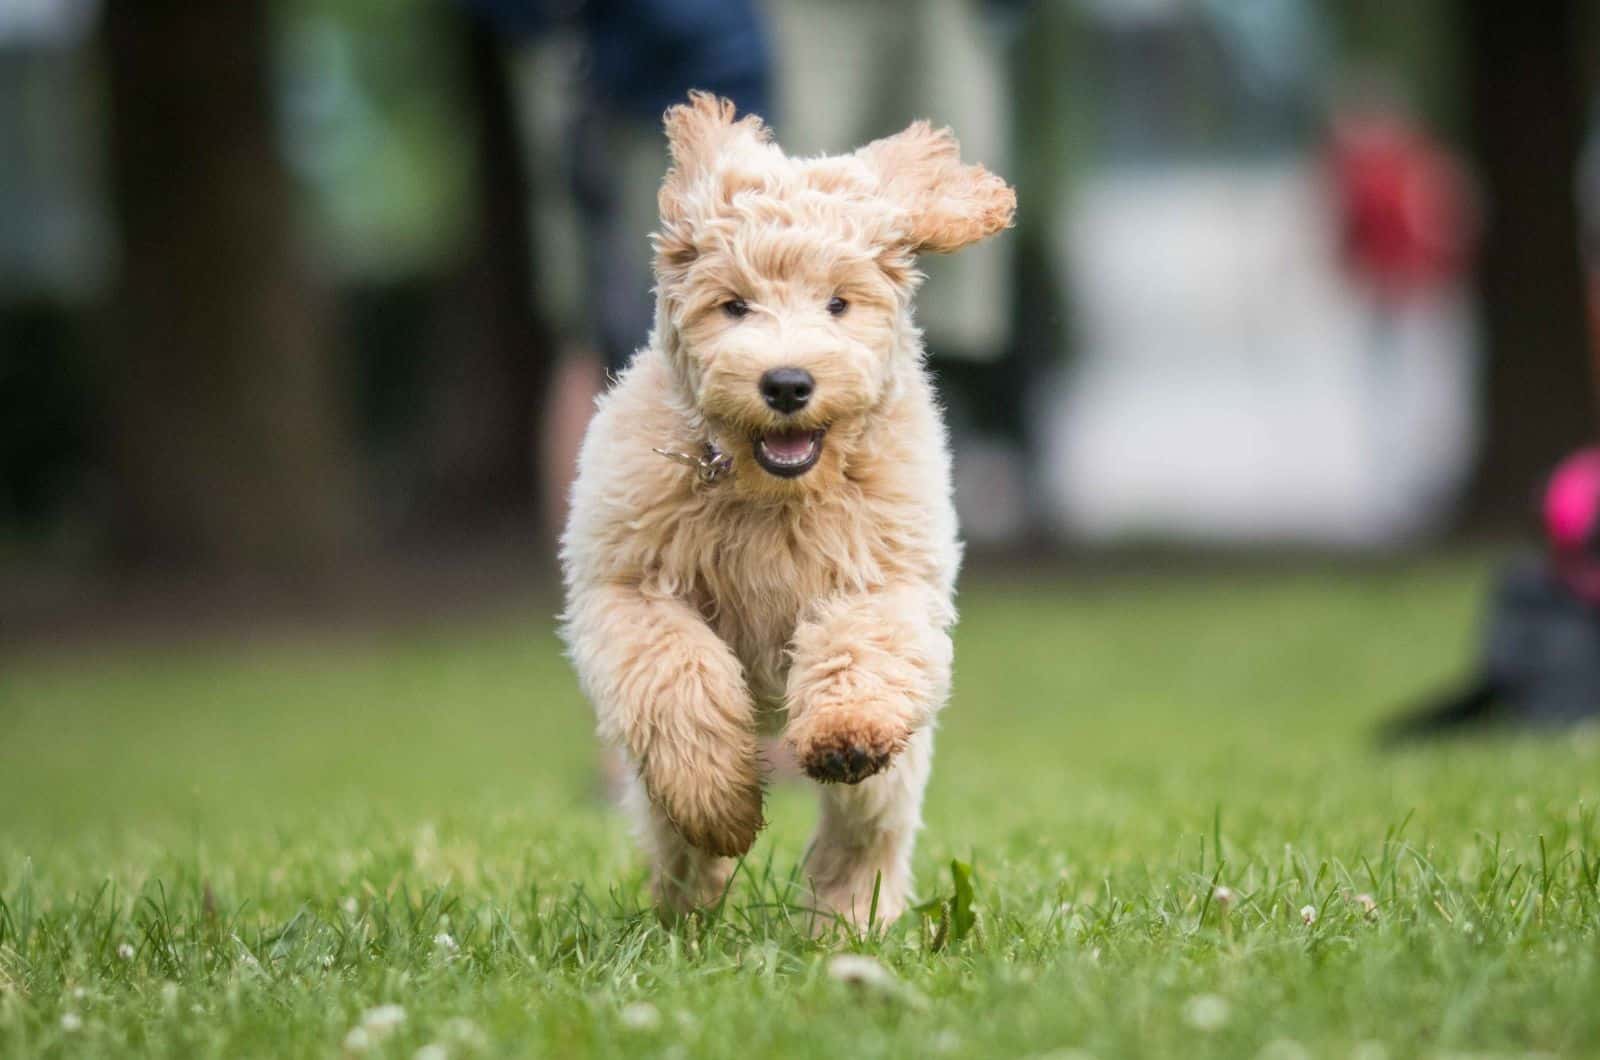 Straight Hair Labradoodle running on grass